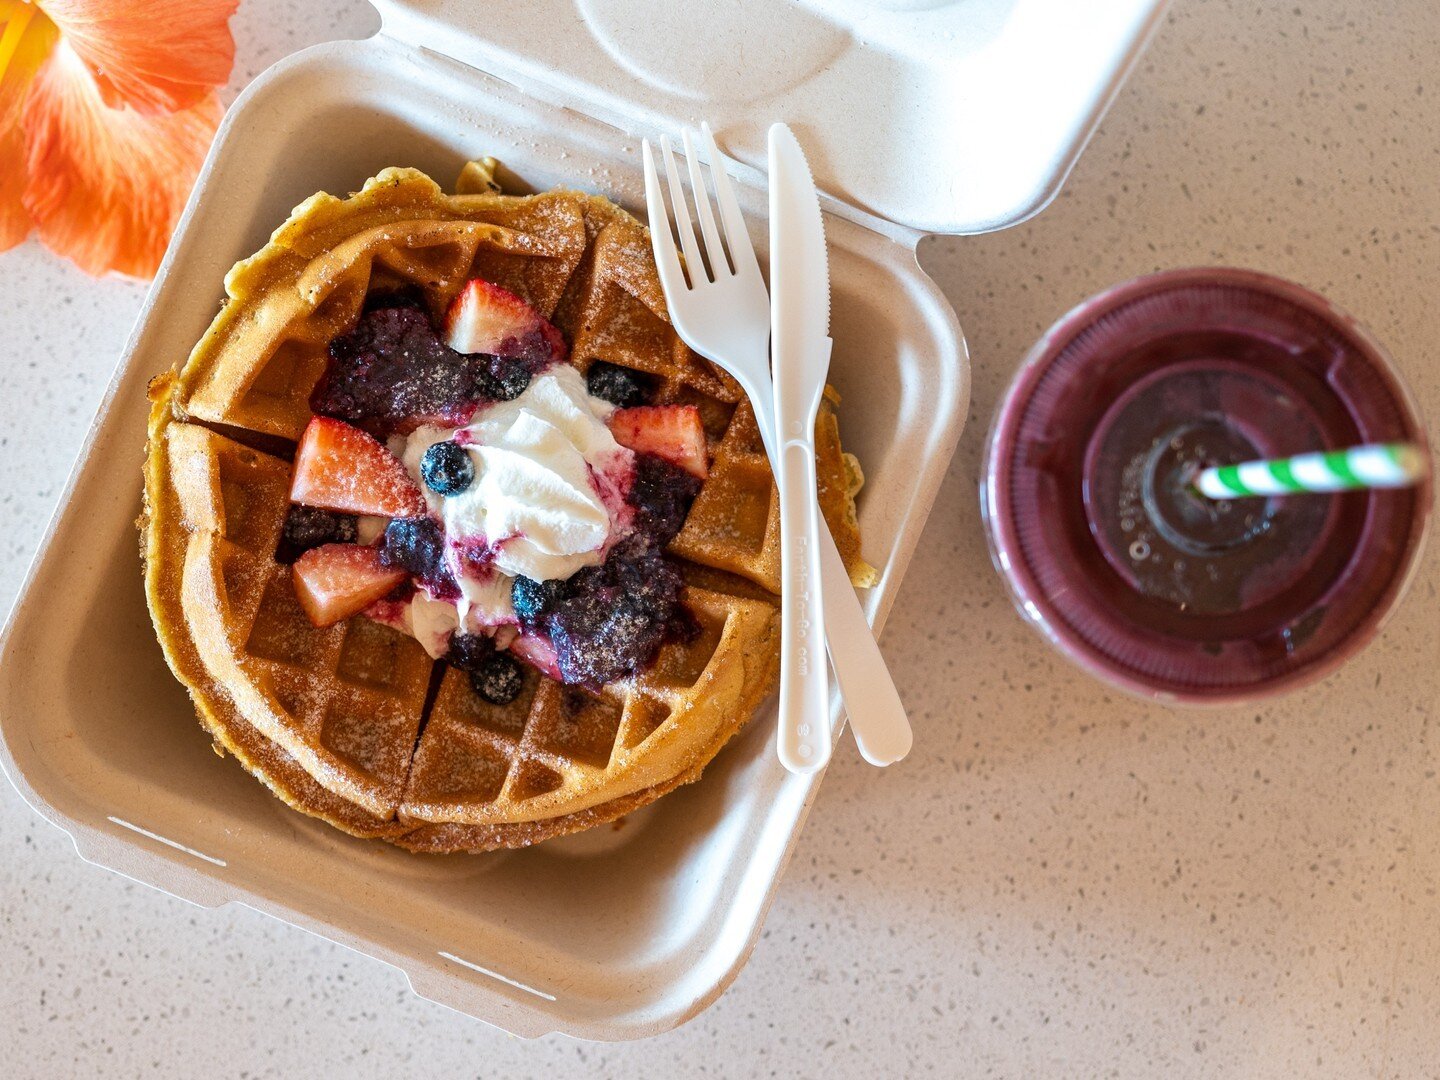 Start your weekend with our Berry Waffle. Topped with our fresh berry compote and vanilla cream.

Available from 6:00 am - 10:30 am. 

#KilaueaMarketCafe #Kauai #KilaueaKauai #KauaiNorthShore #KauaiFoodie #Breakfast